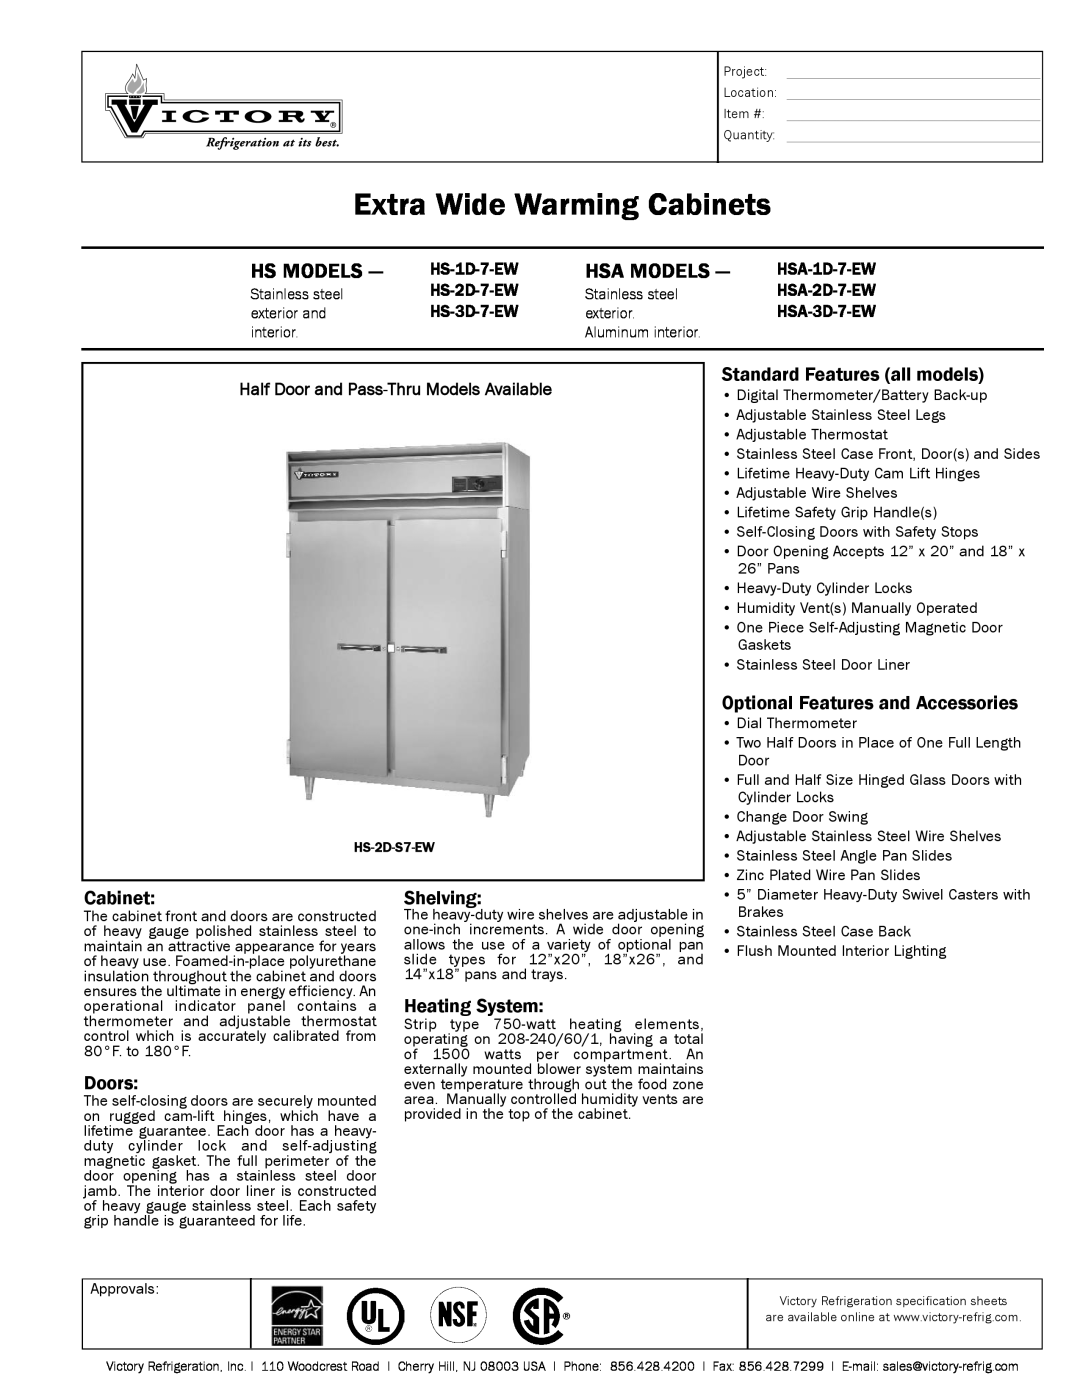 Victory Refrigeration HS-1D-7-EW specifications Half Door and Pass-Thru Models Available, Extra Wide Warming Cabinets 